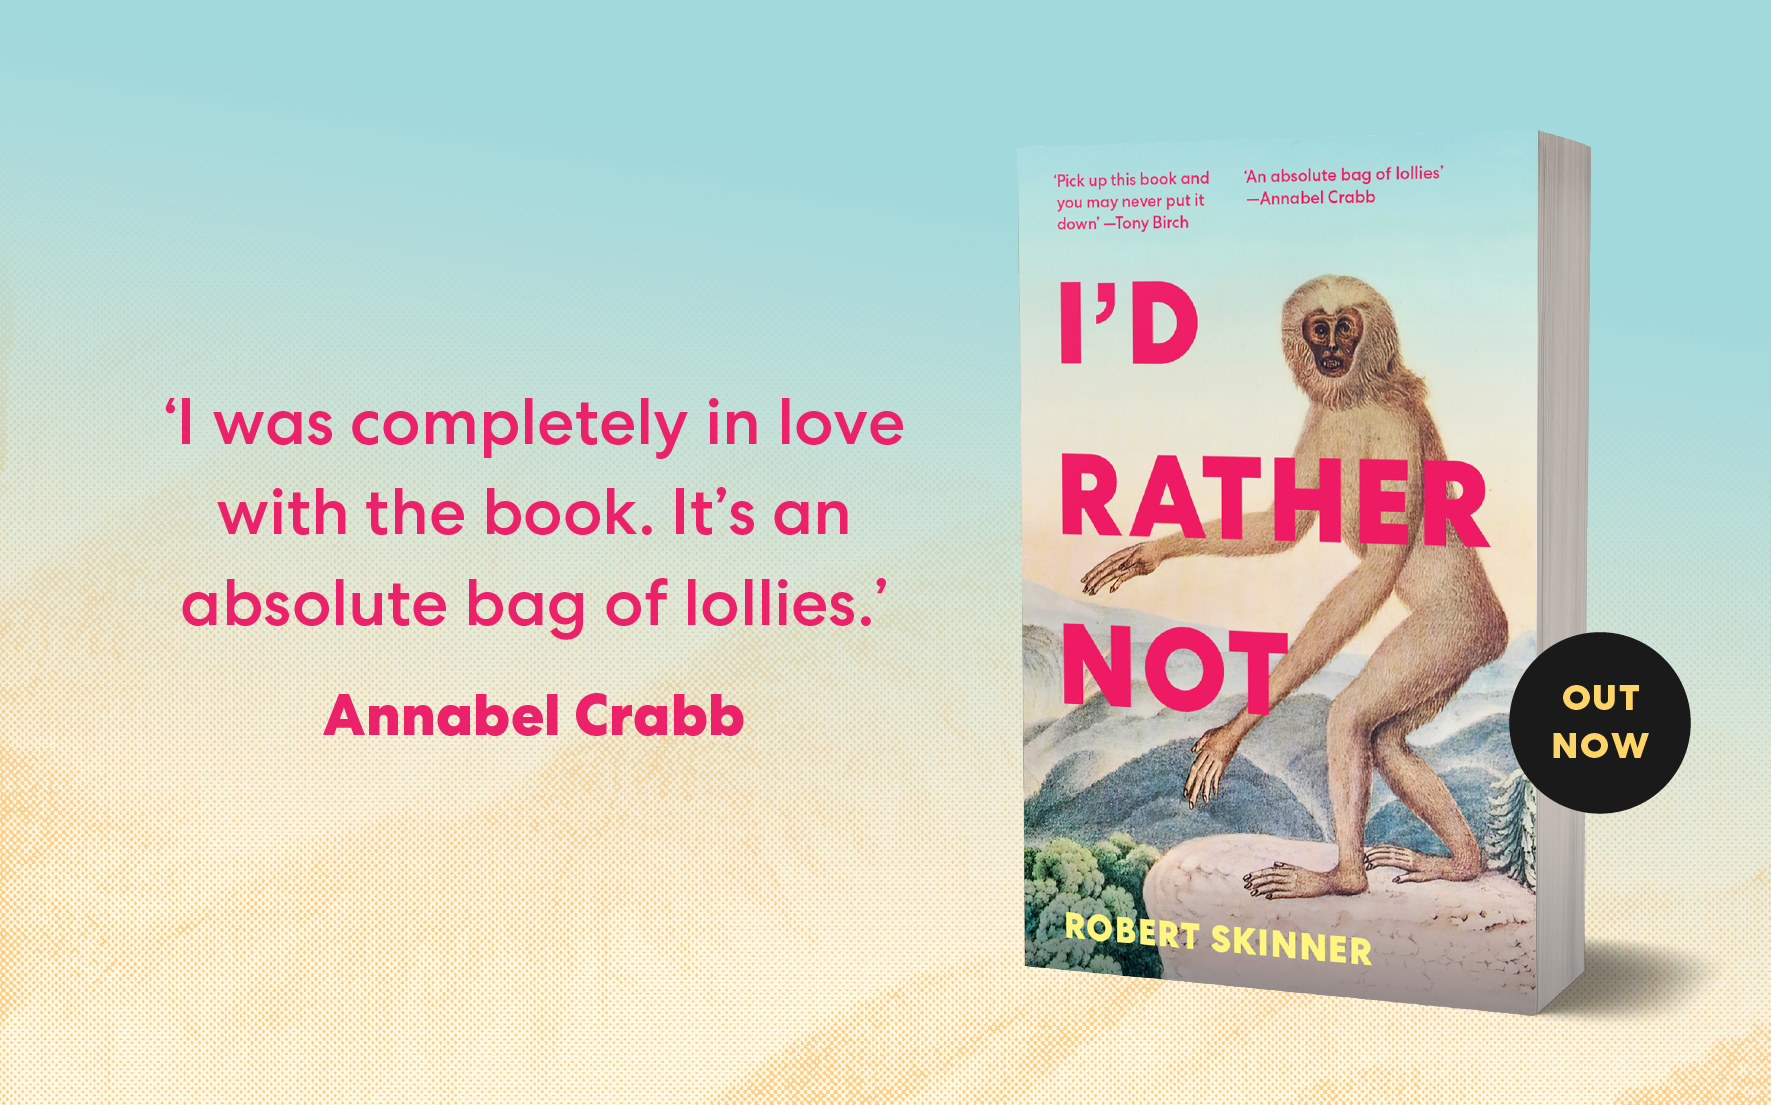 Out Now: I'd Rather Not